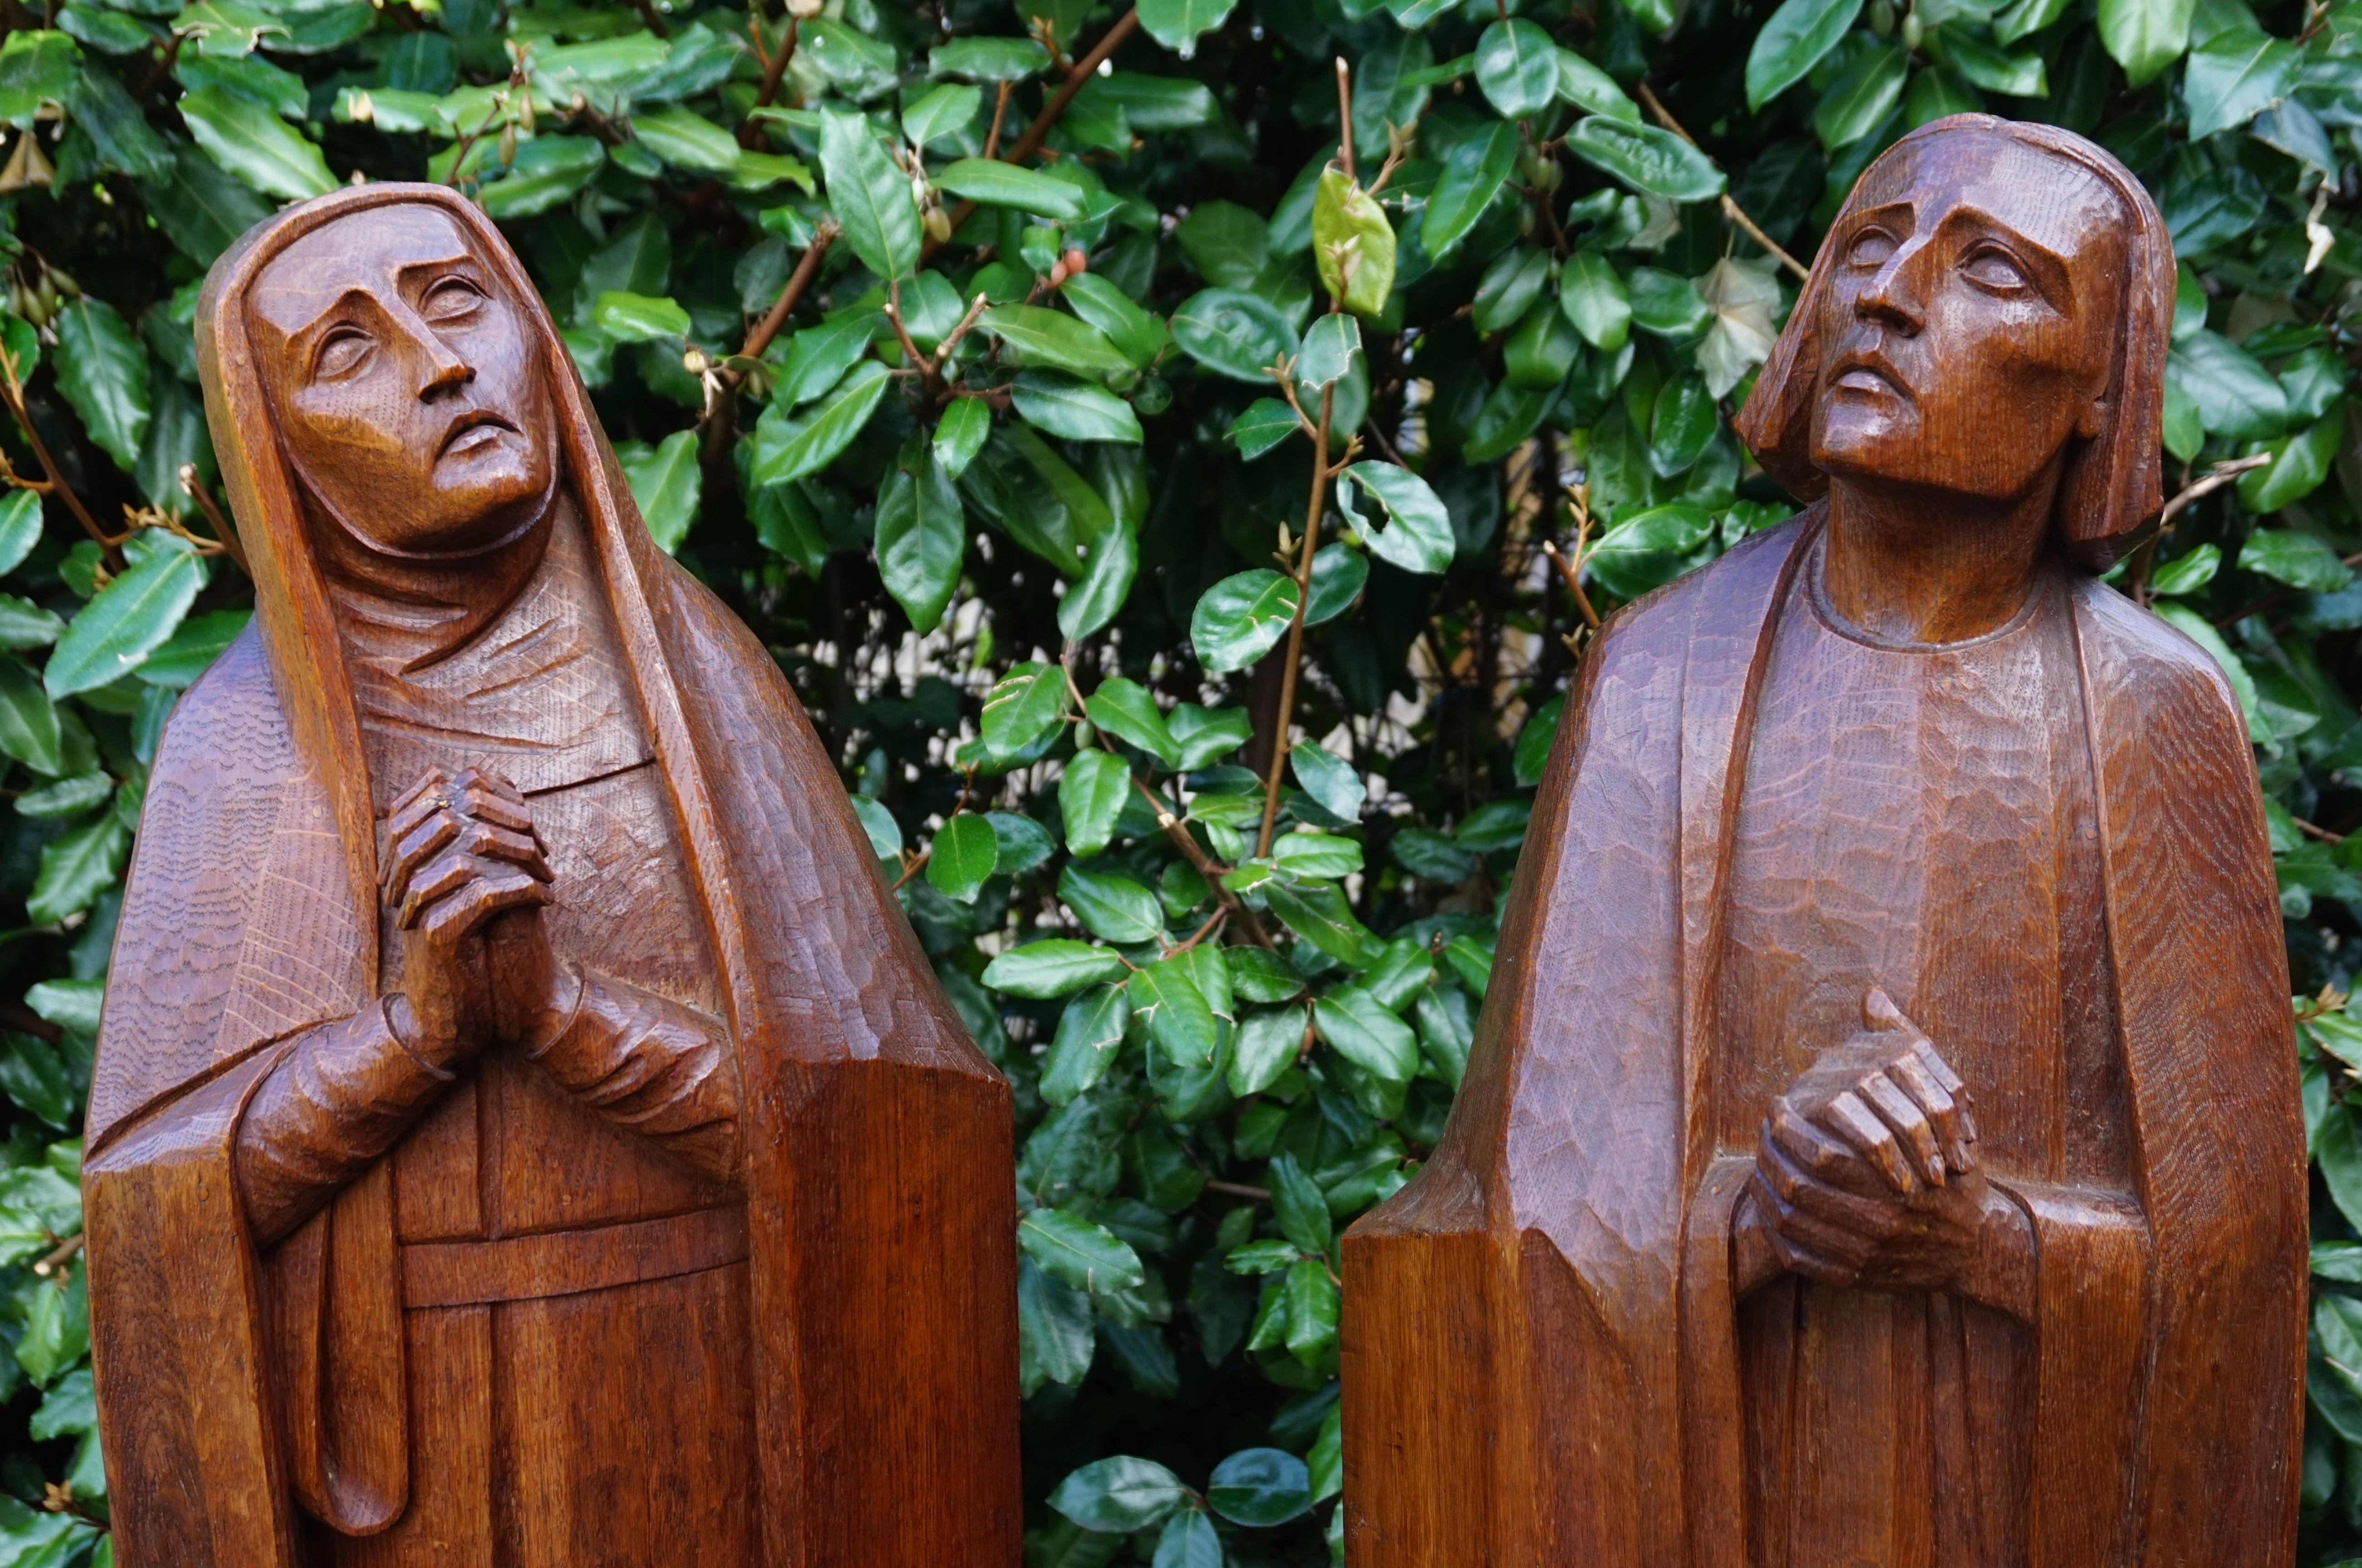 Large and impressive church altar sculptures of Mother Mary and Saint John.

These large and striking, mourning Mary and Saint John sculptures were once part of a church altar set. The partially flat sides of these works of religious art once stood